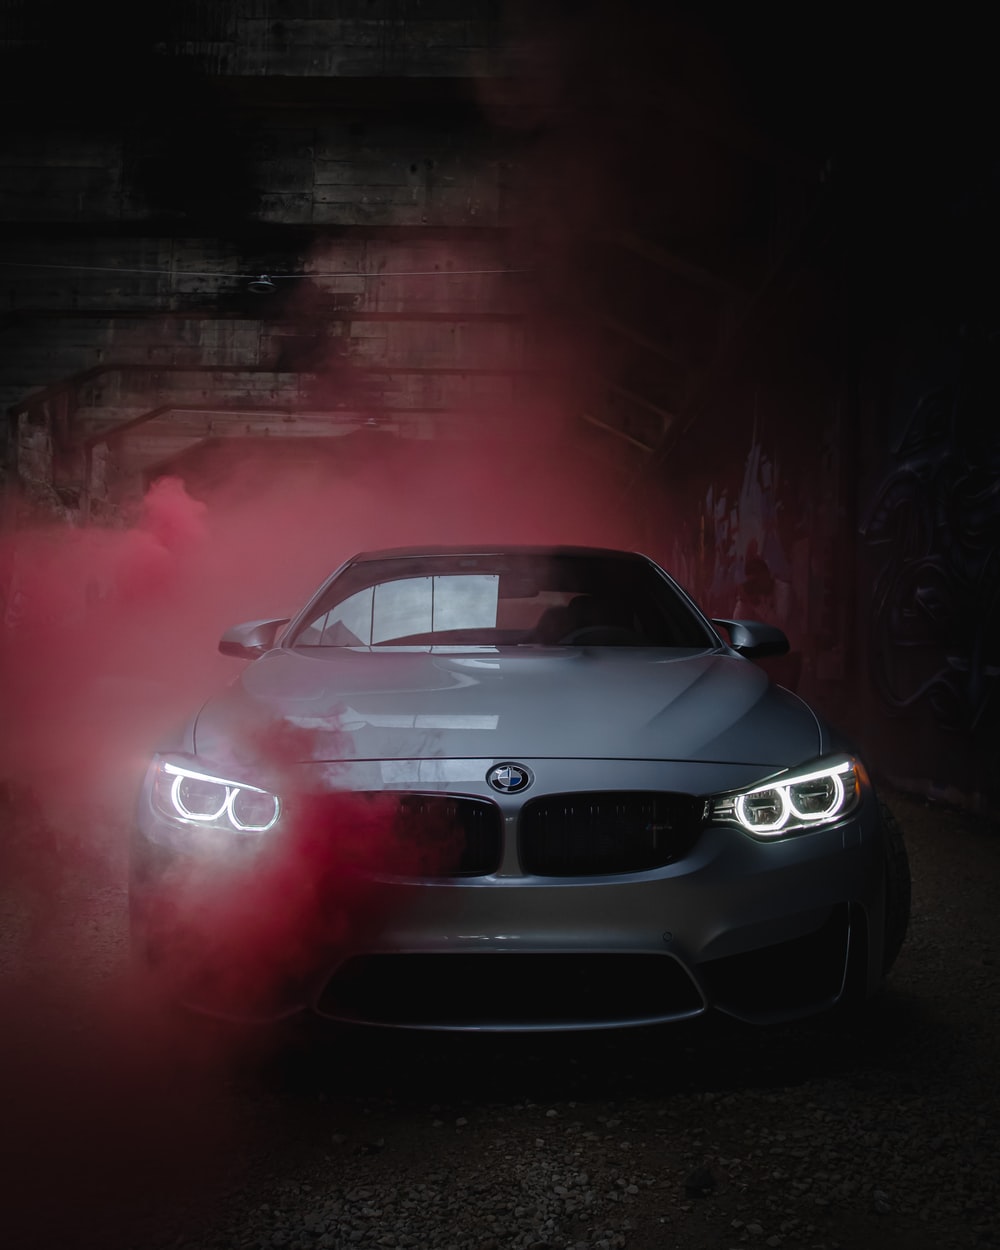 Bmw Car Picture. Download Free Image